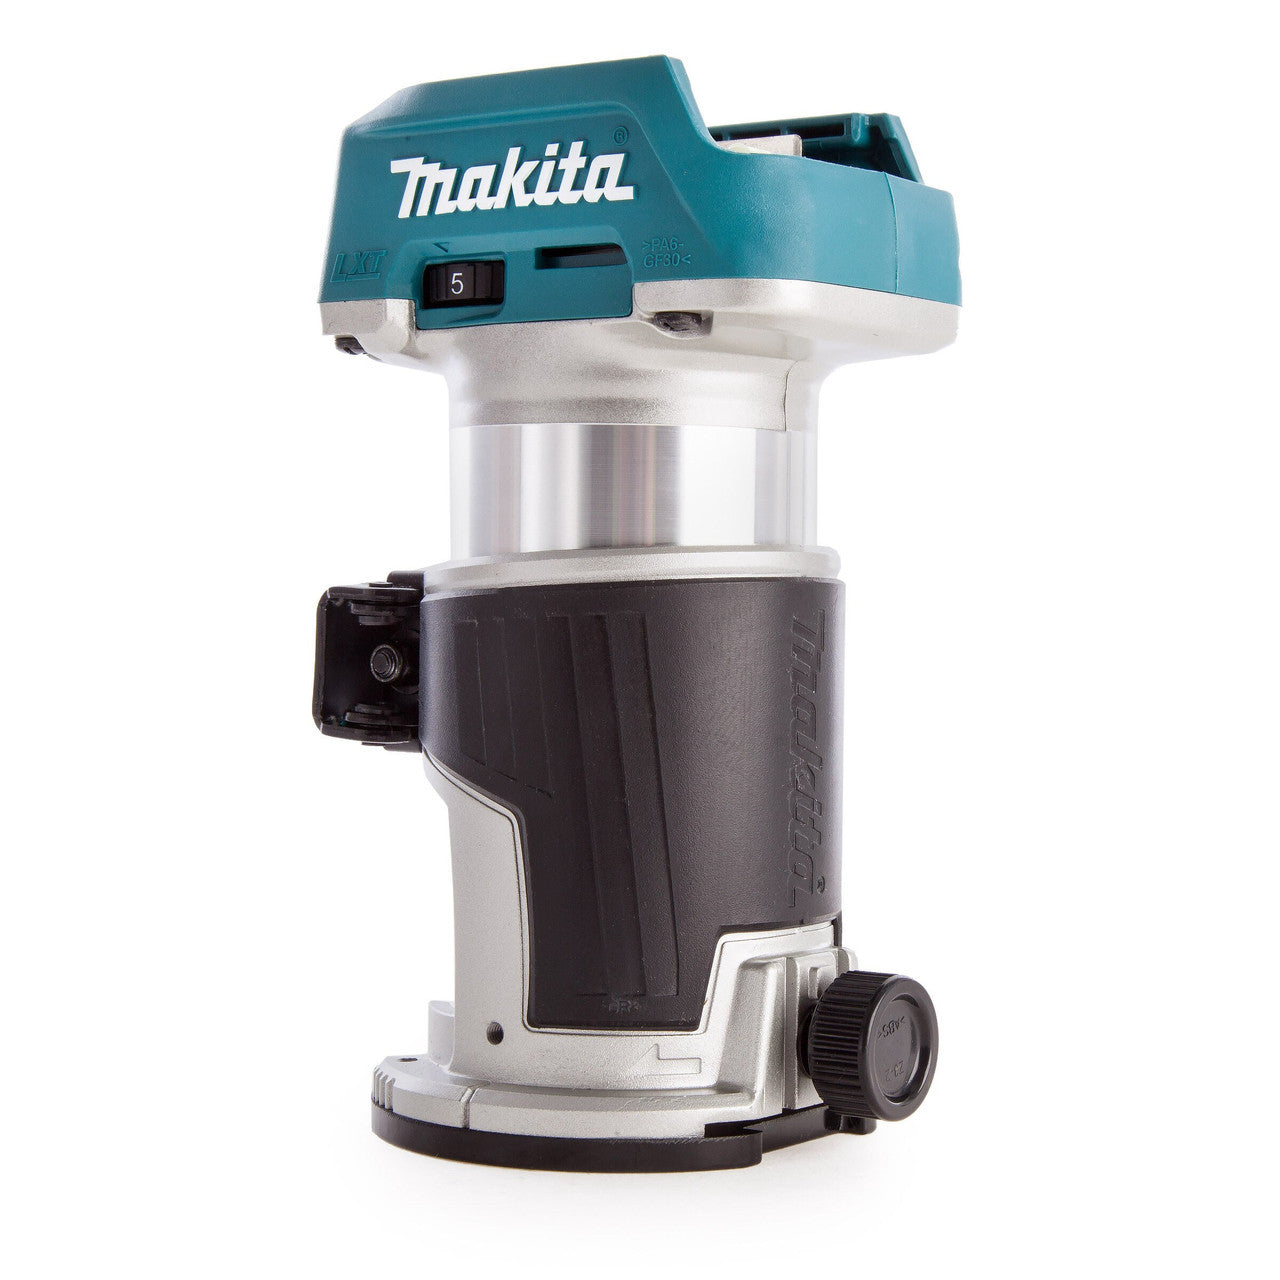 Makita DRT50ZJX3 18V LXT 1/4" Brushless Router/Trimmer with 4 Bases & 2 Guides (Body Only)